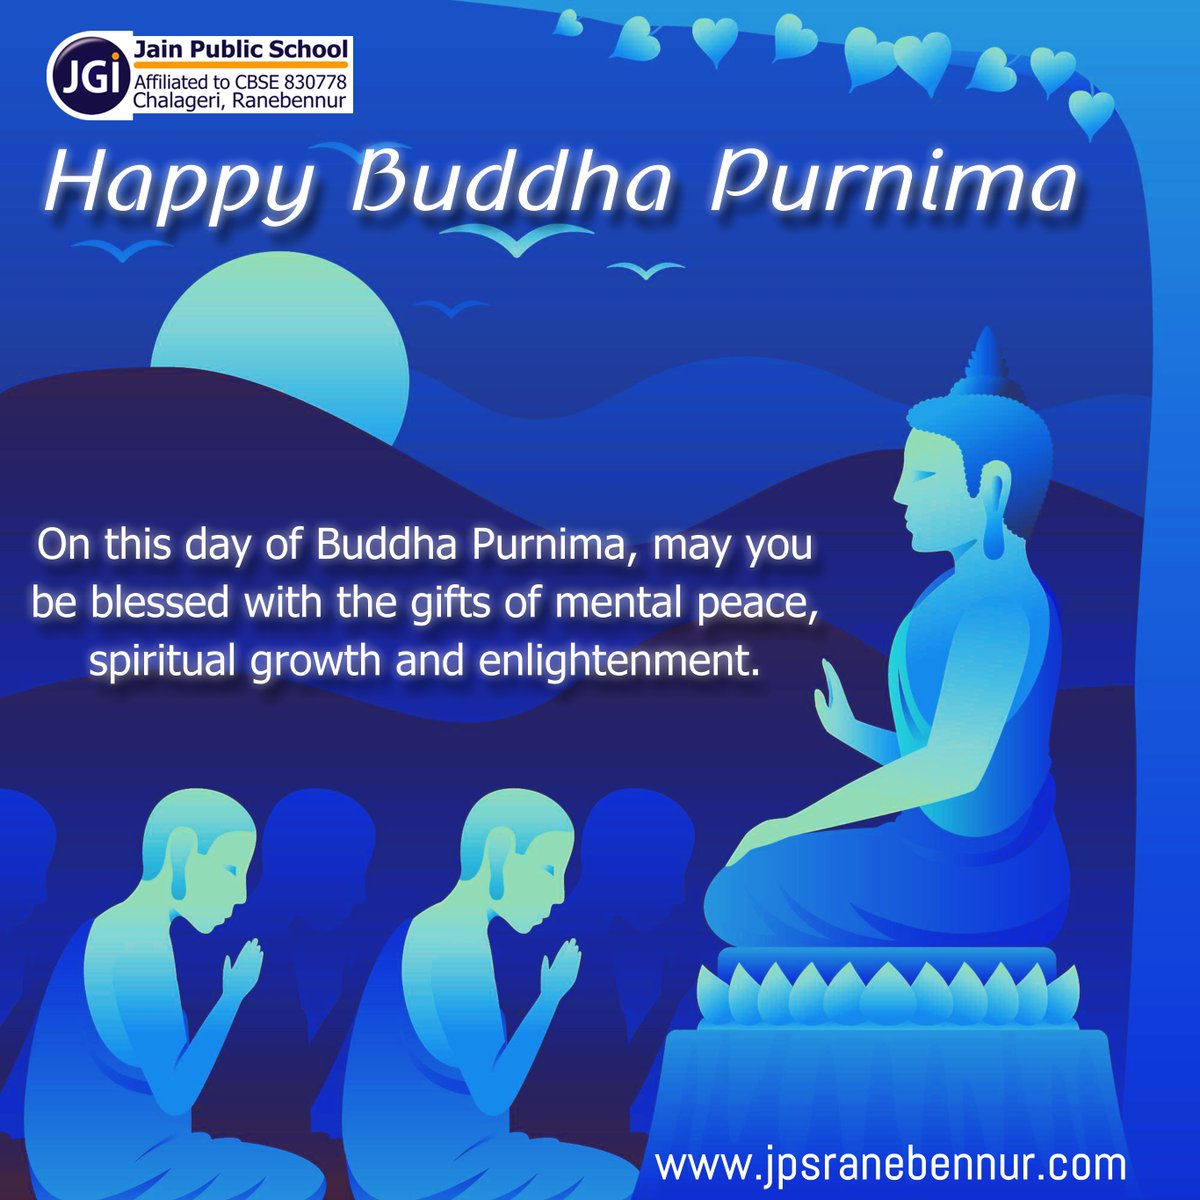 Jain Public School, Ranebennur
wishing you Happy Buddha Purnima!
'On this day of Buddha Purnima, may you be blessed with the gifts of mental peace, spiritual growth and enlightenment.'
jpsranebennur.com
#HappyBuddhaPurnima #jainpublicschoolranebennur
freepik.com